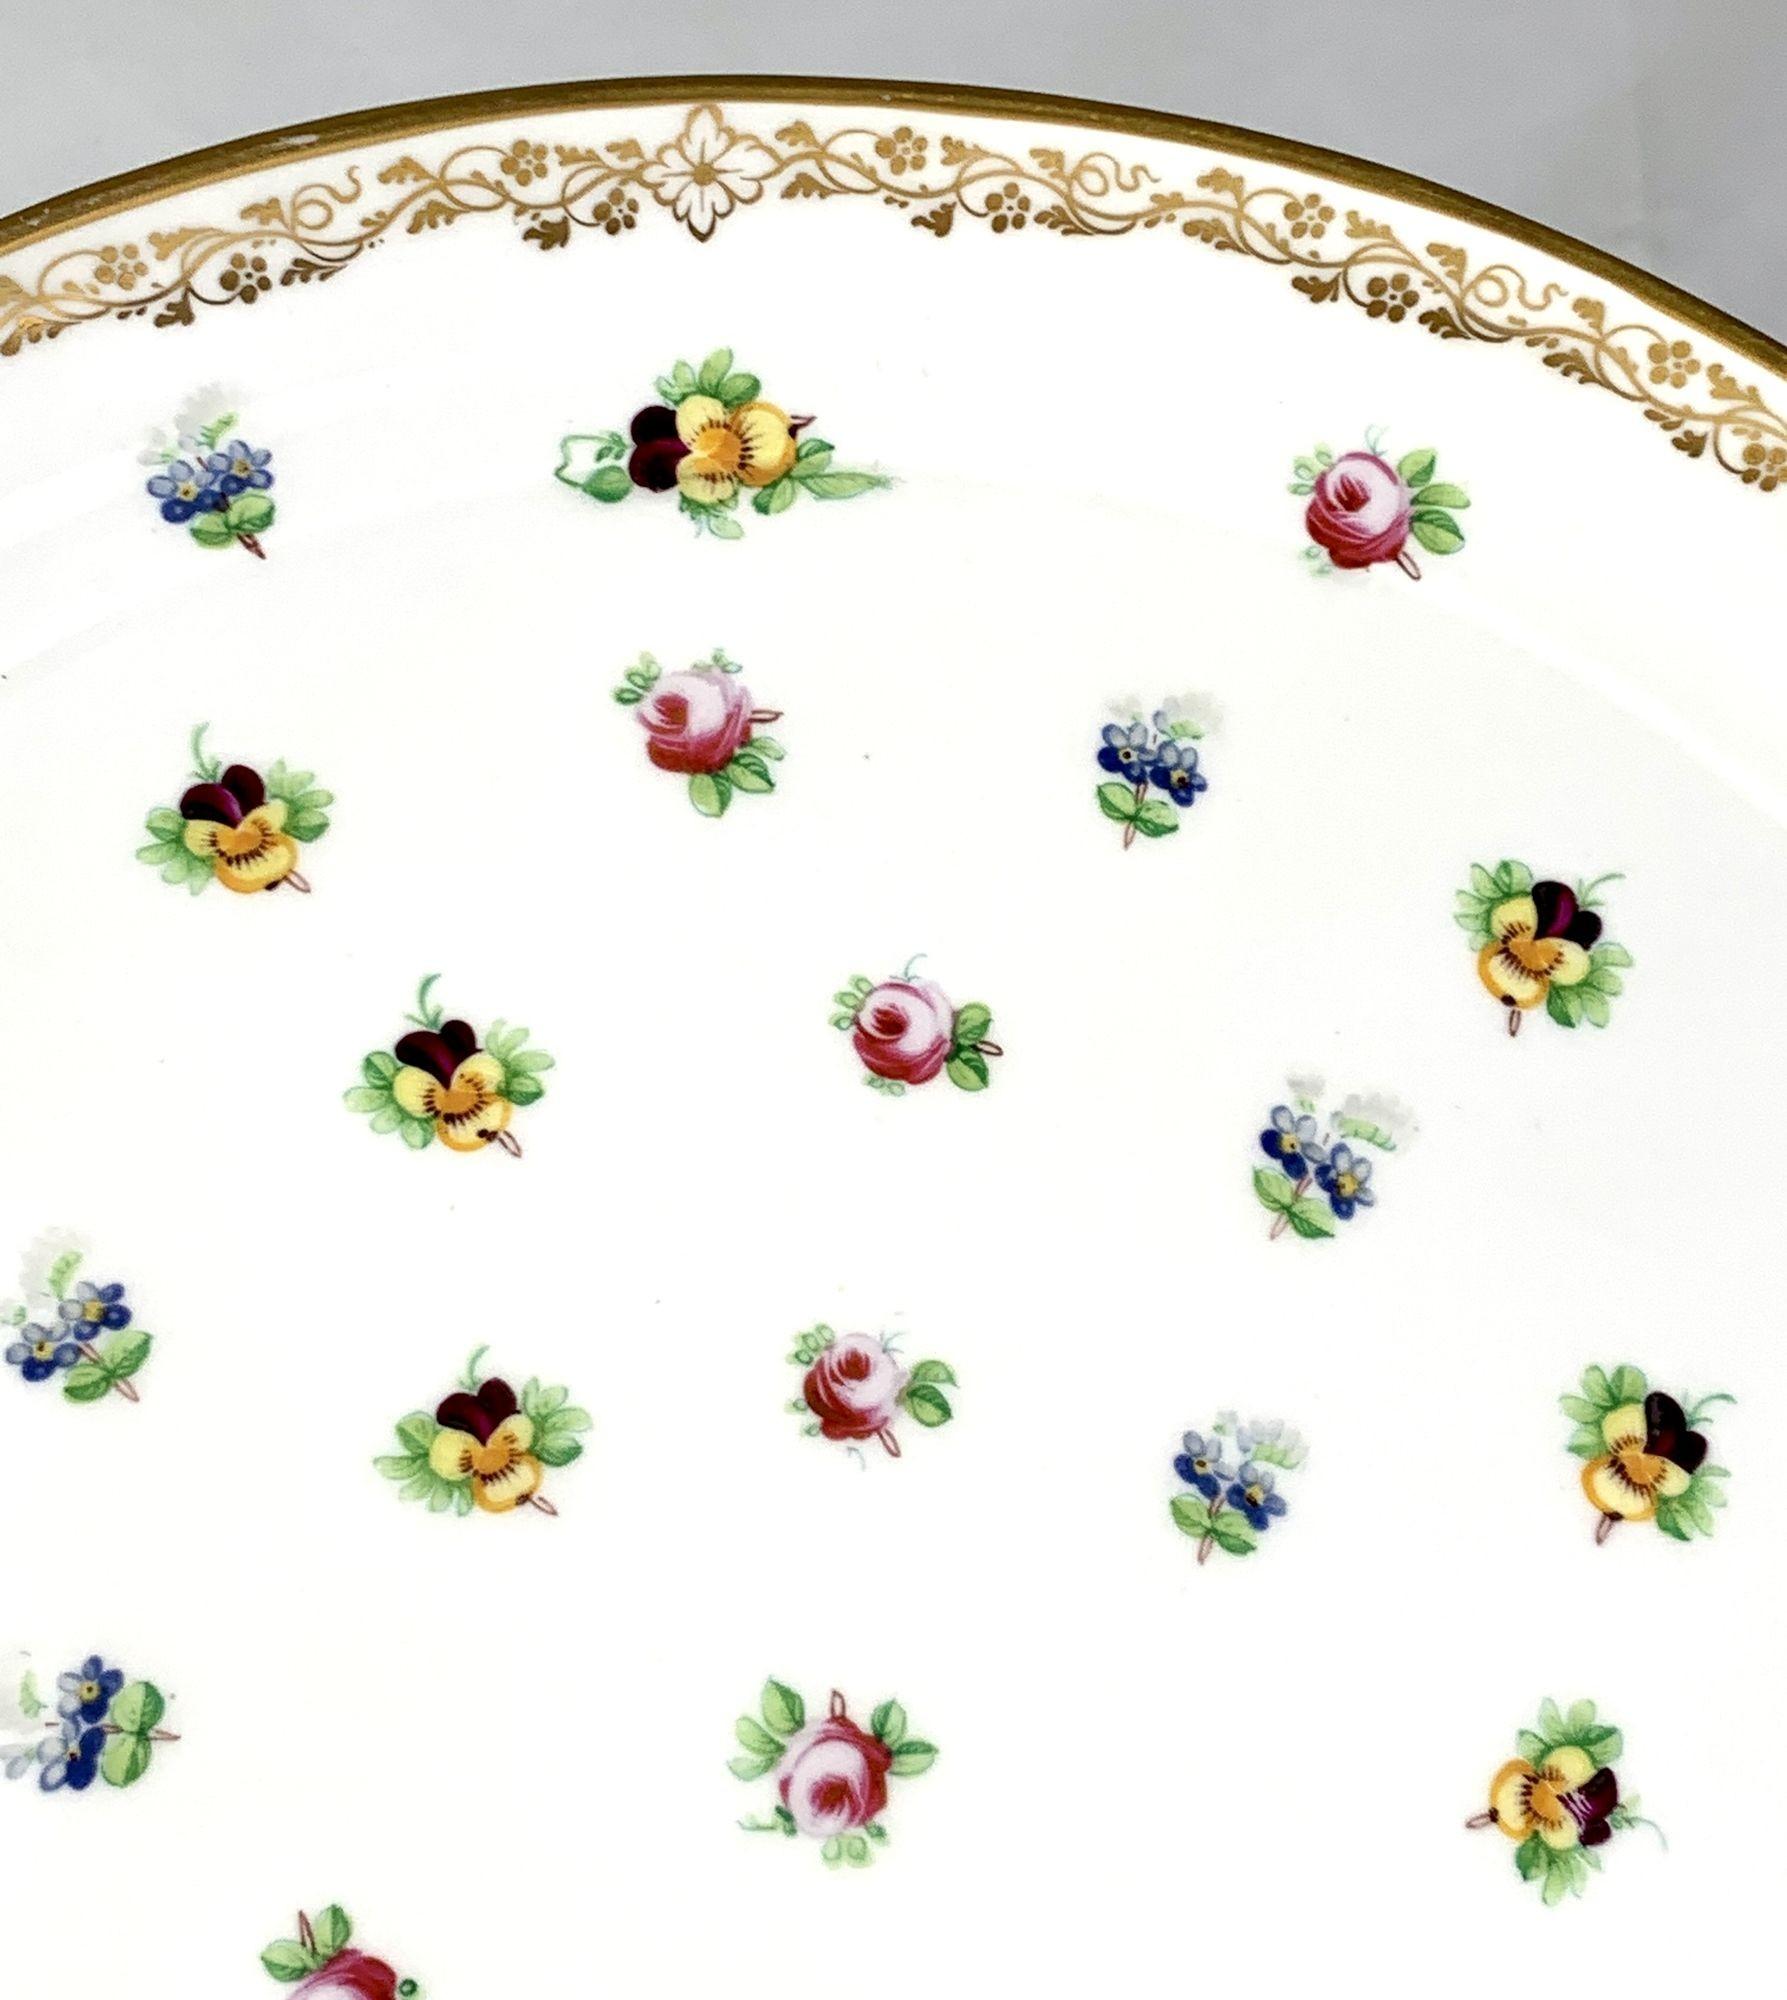 This is the perfect serving platter for cool drinks in the garden on a summer's day.
Made by Minton circa 1840, the platter shows delicate roses, forget me knots, and pansies scattered about.
The roses are a lovely pink, the pansies the expected